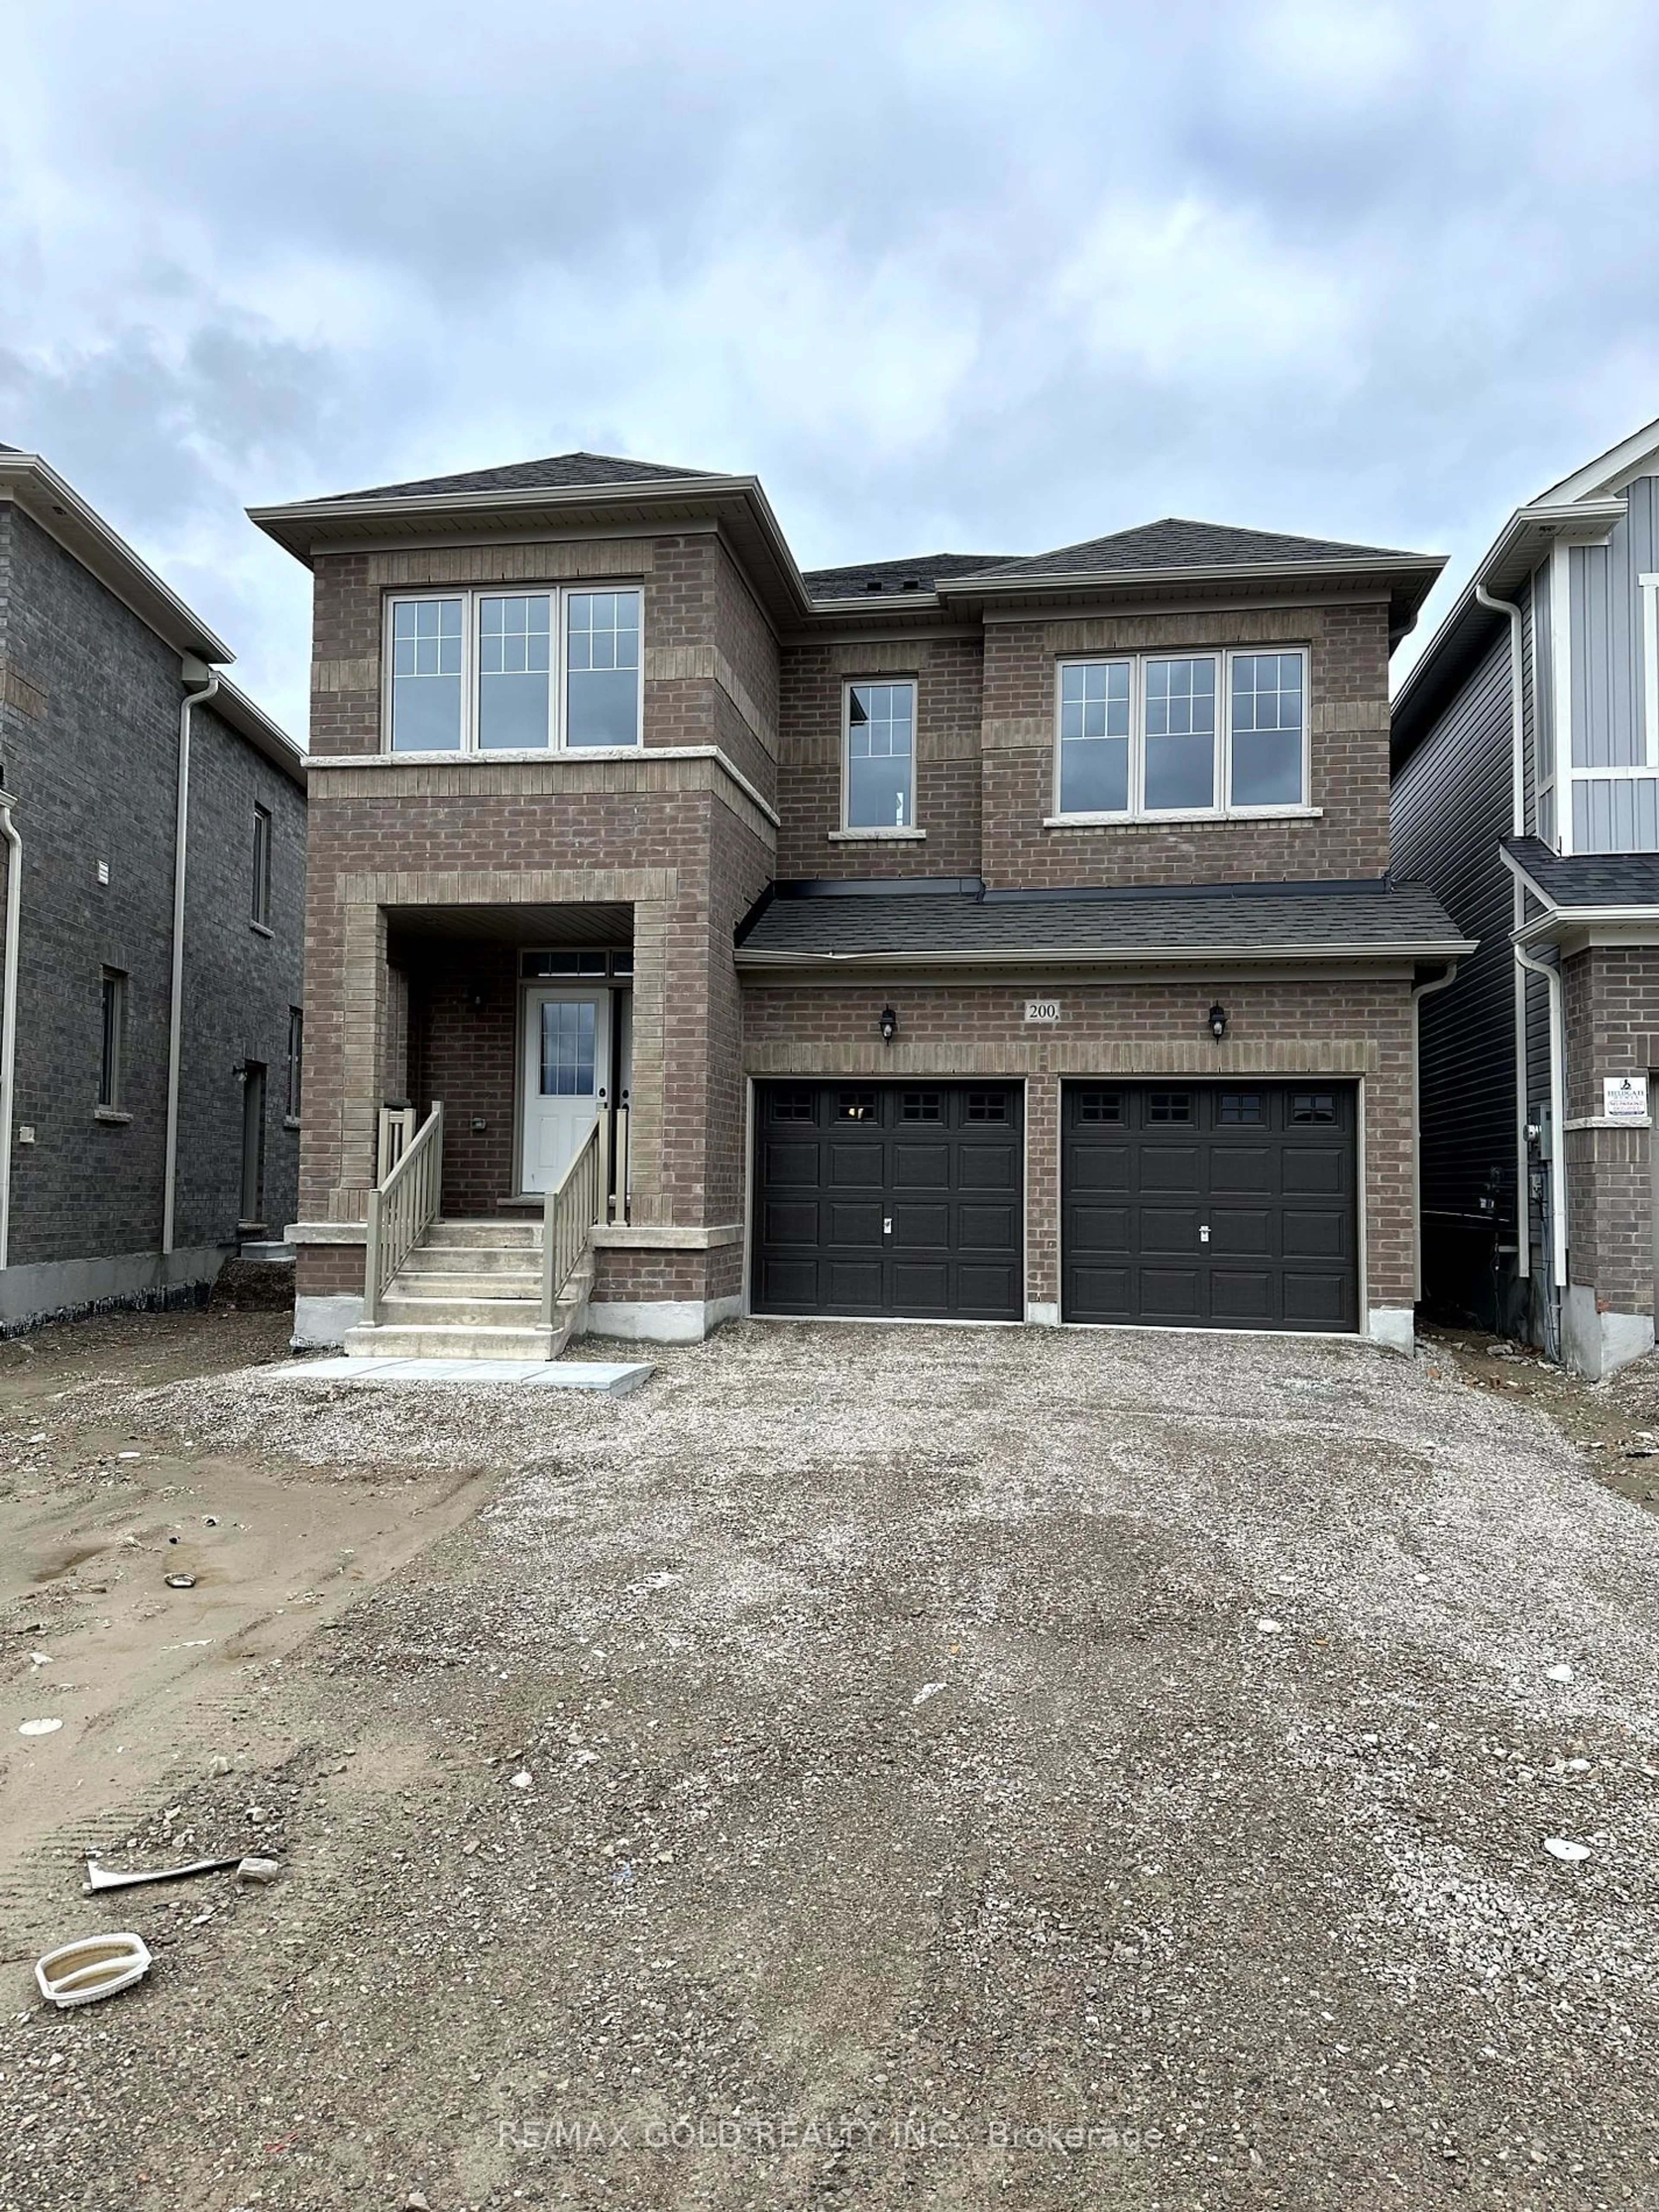 Home with brick exterior material for 200 Limestone Lane, Shelburne Ontario L9V 3Y3